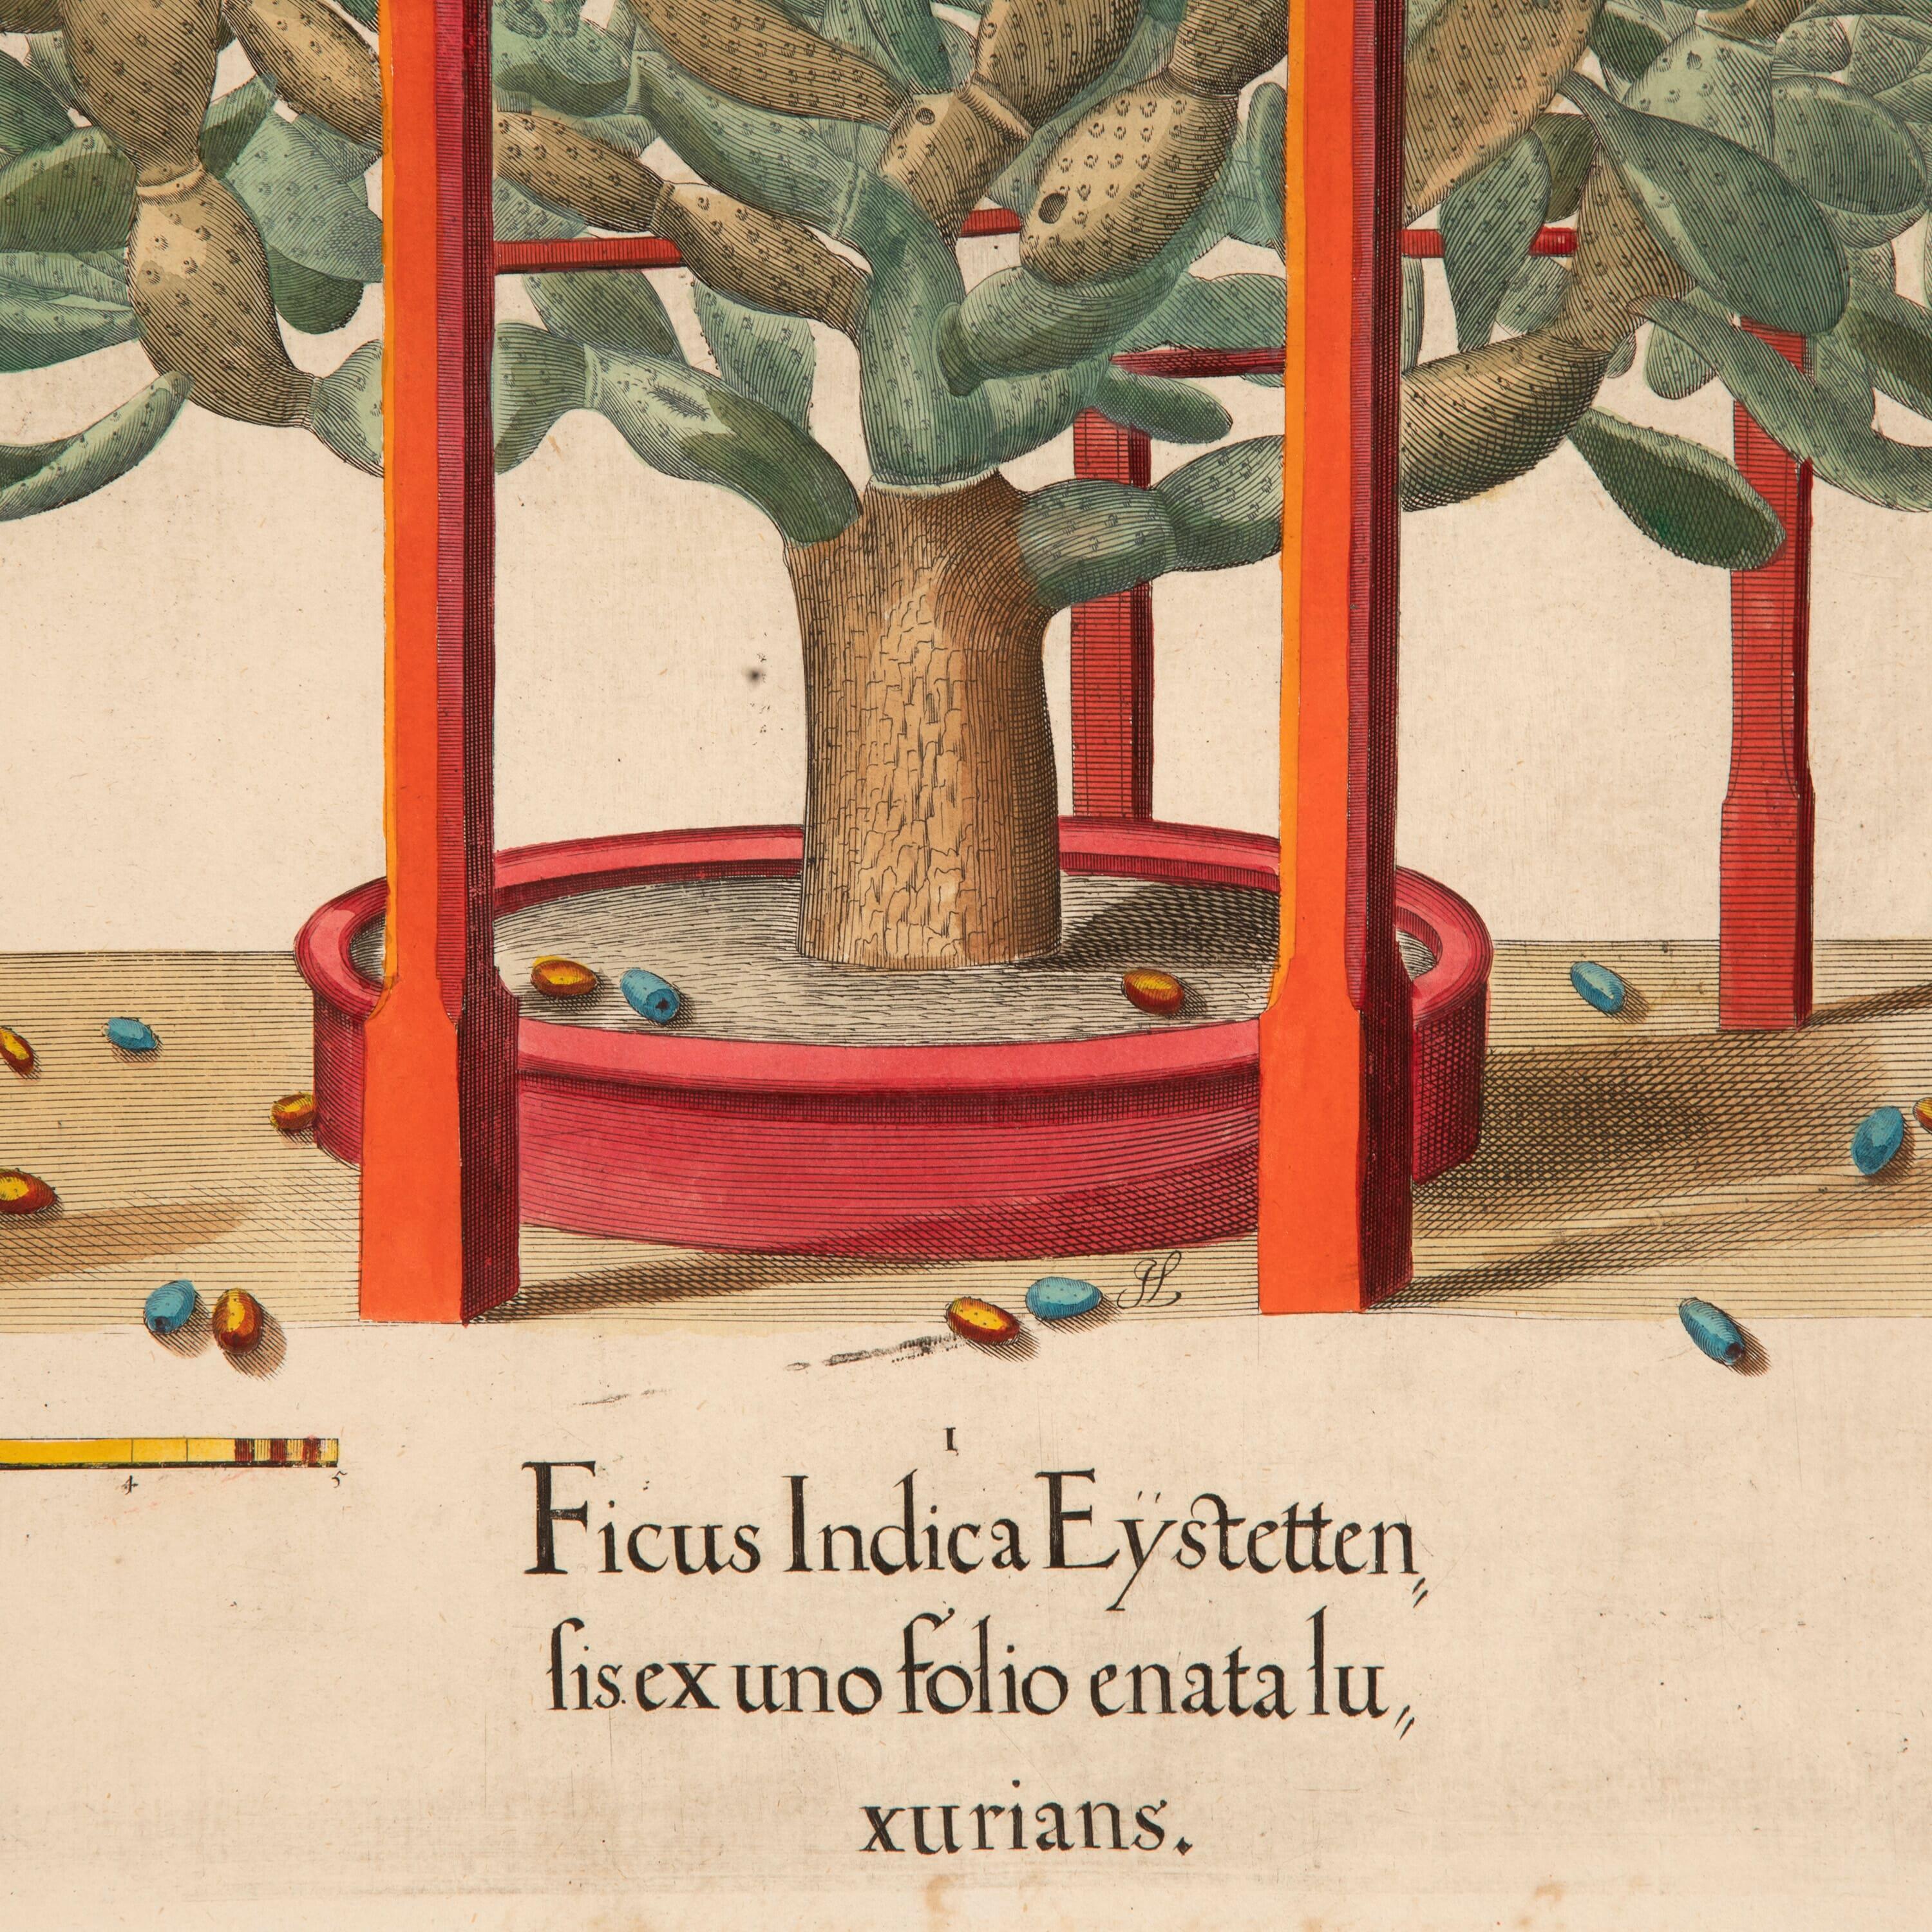 Superb original hand coloured engraving of the iconic 'Prickly Pear Tree' by Basilius Besler dating to 1640.

Basilius Besler (1561-1629) was a prominent botanist and apothecarist in Nuremberg. He was tasked with curating the garden of Johann